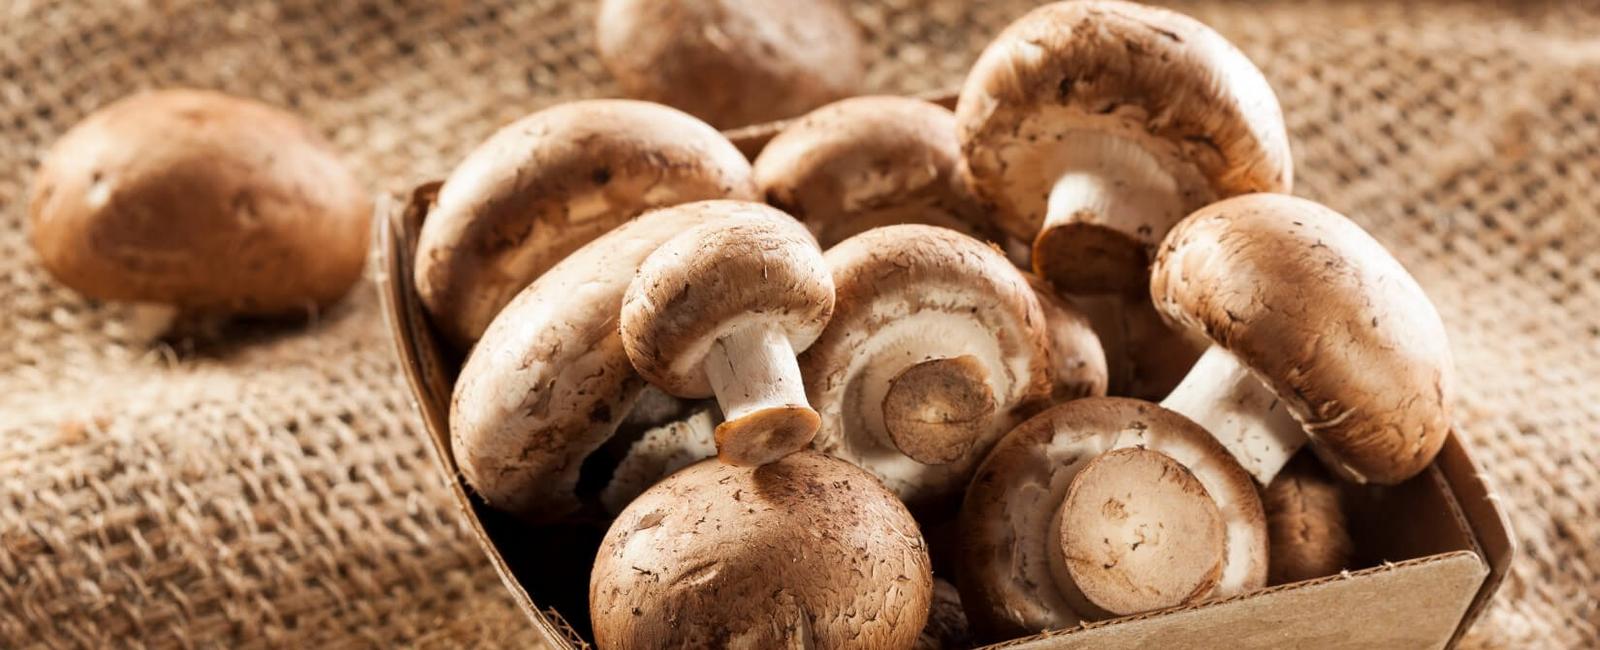 The Complete Guide to Baby Bella Mushrooms